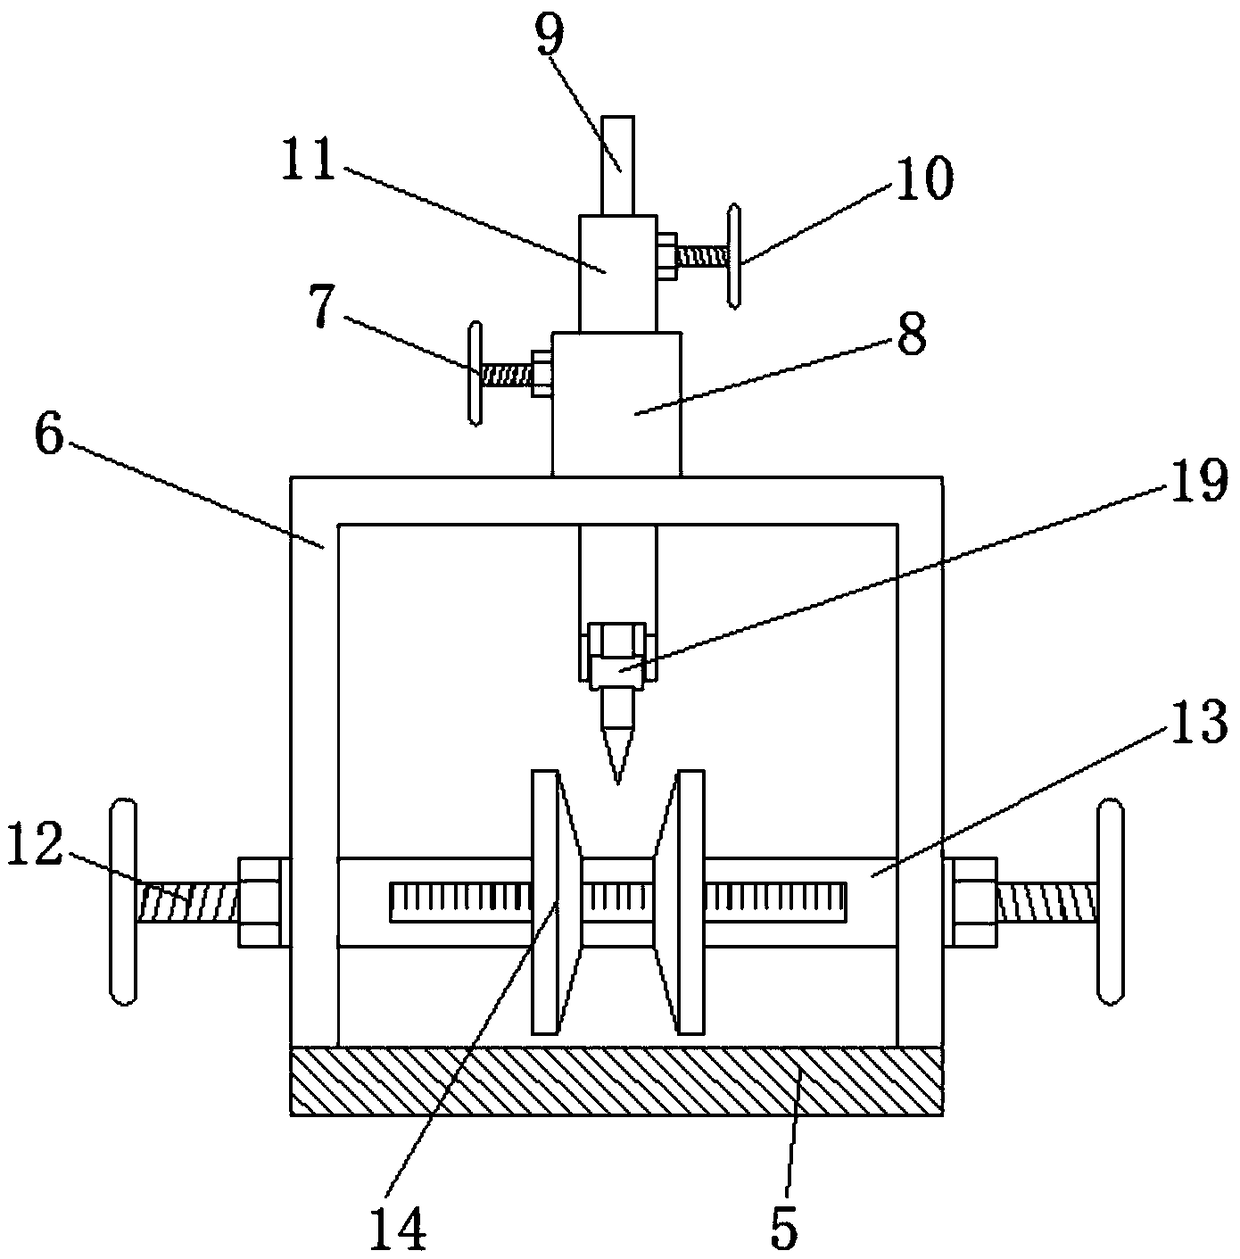 Manual stripping device capable of being applicable to cables in different sizes